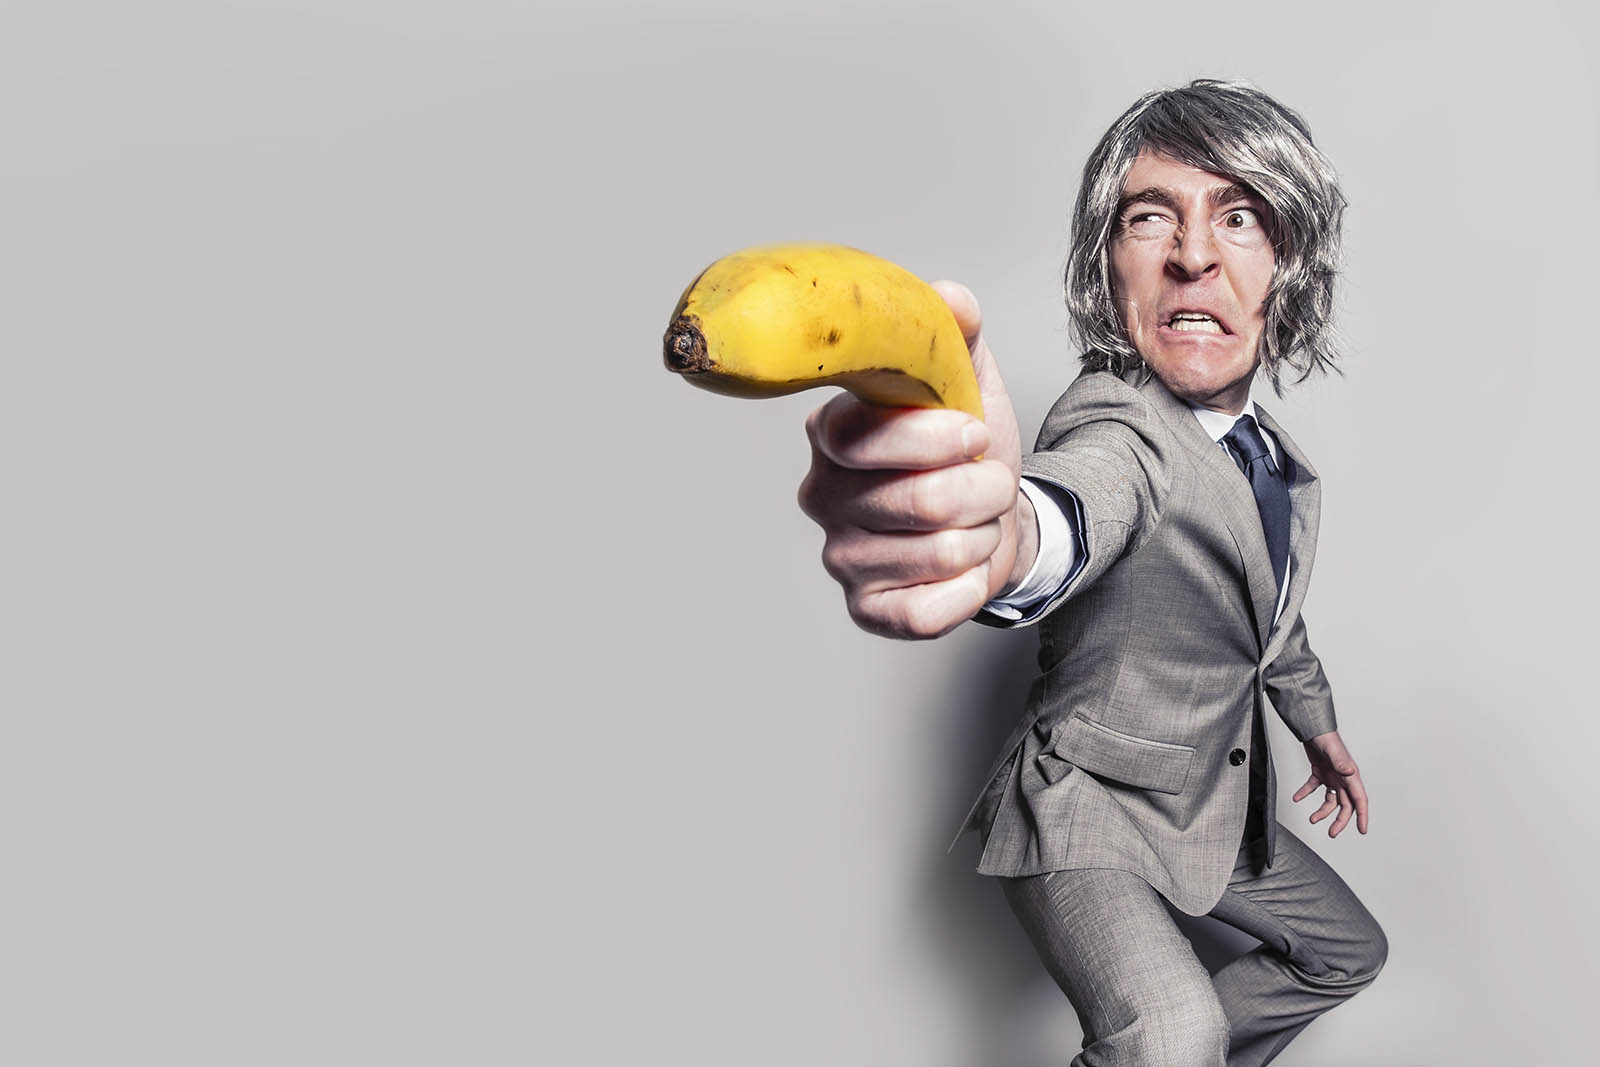 Man In Business Suit Holding Banana Bizarre